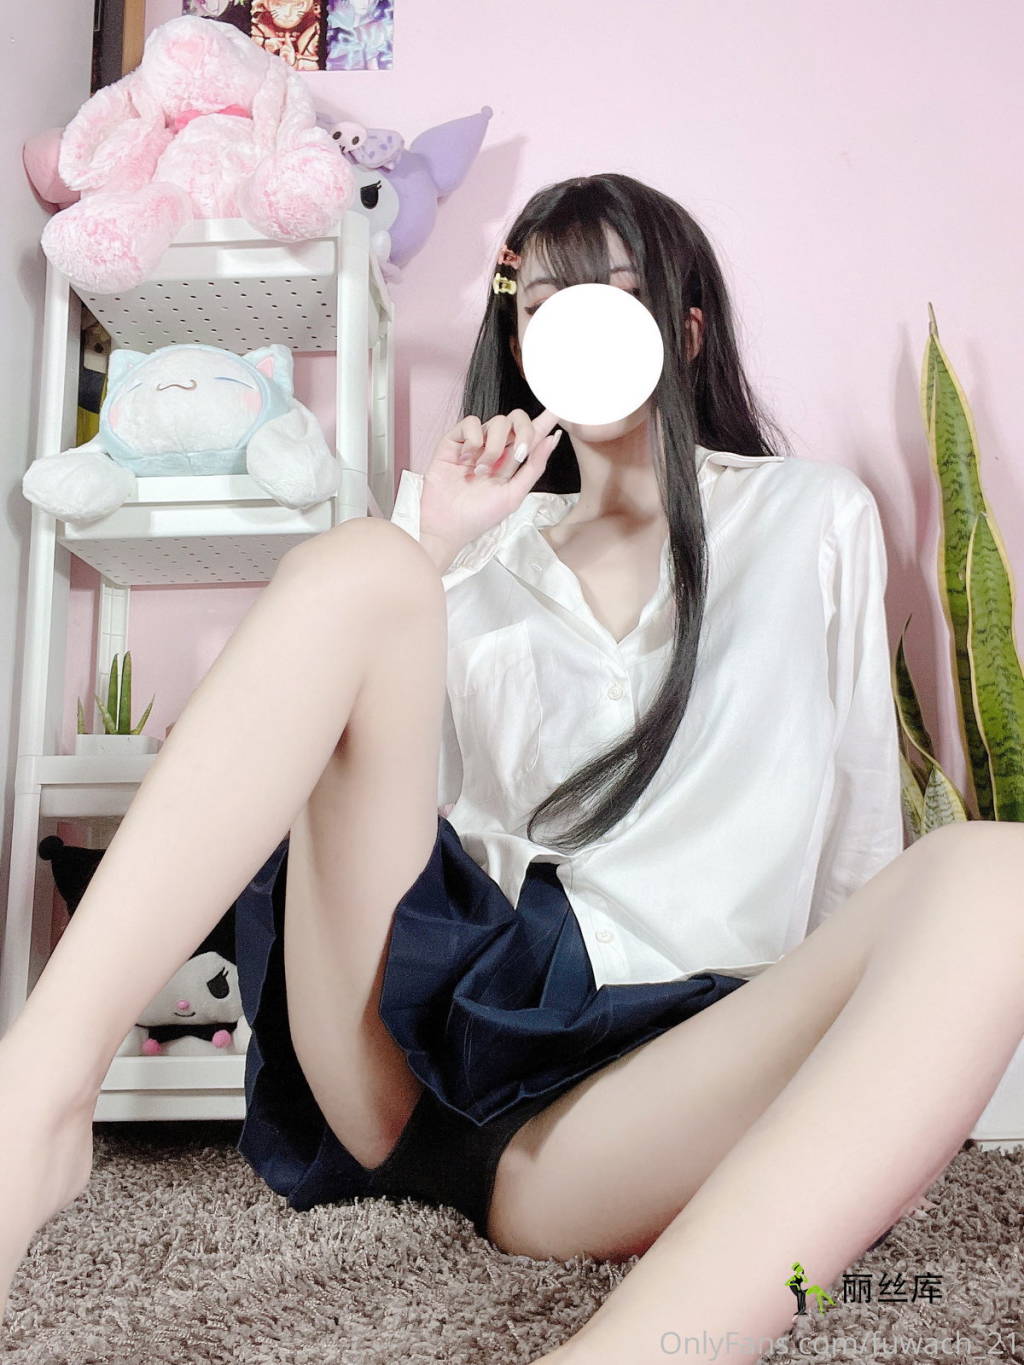 Onlyfans fuwa  ͼϼ part3_˿